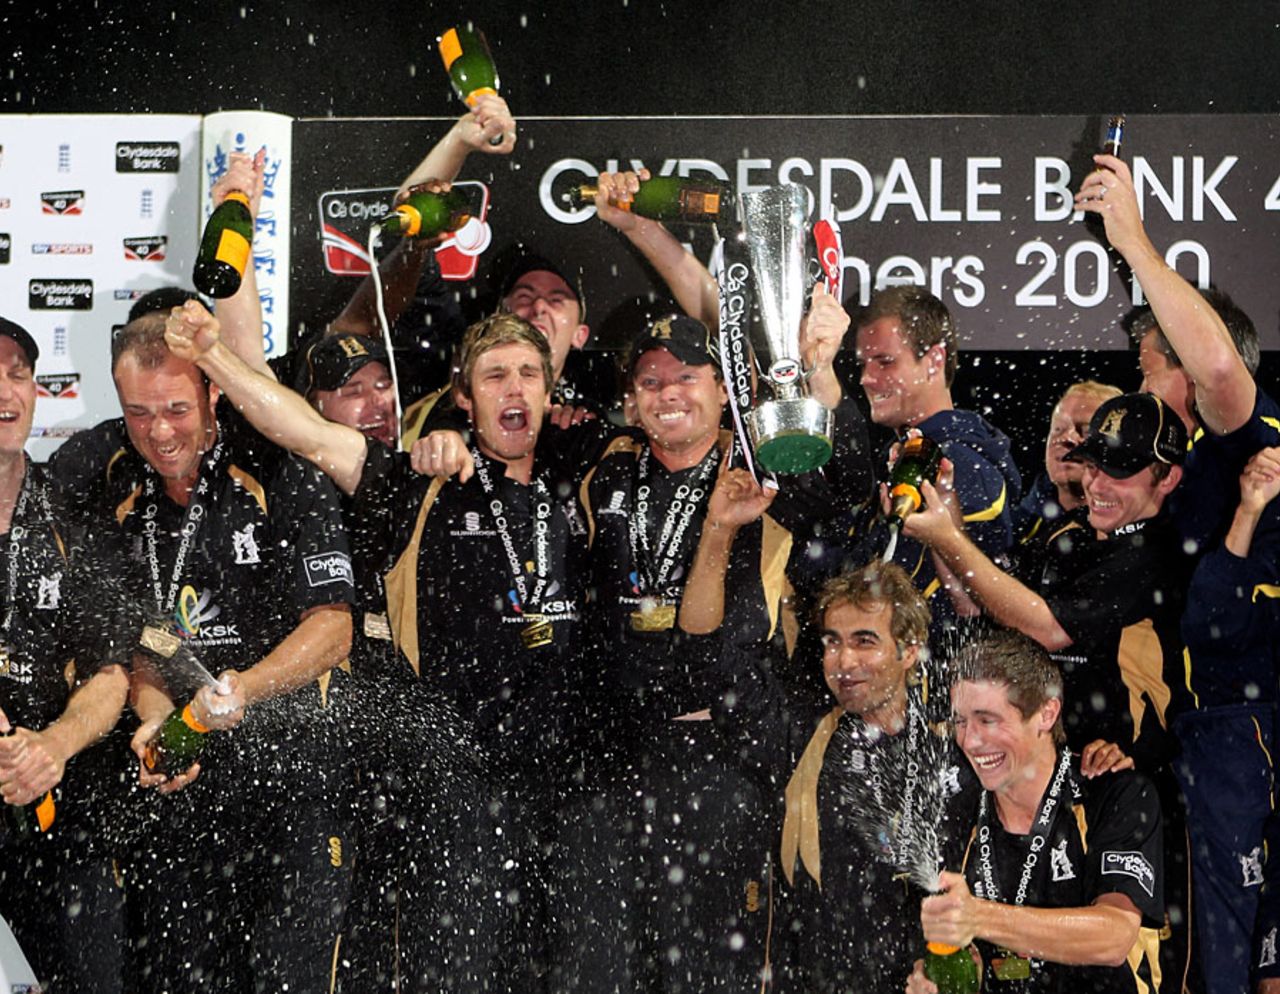 Ian Bell leads the Warwickshire celebrations after his match-winning 107 sealed the Clydesdale Bank 40 title, Somerset v Warwickshire, CB40 final, Lord's, September 18, 2010